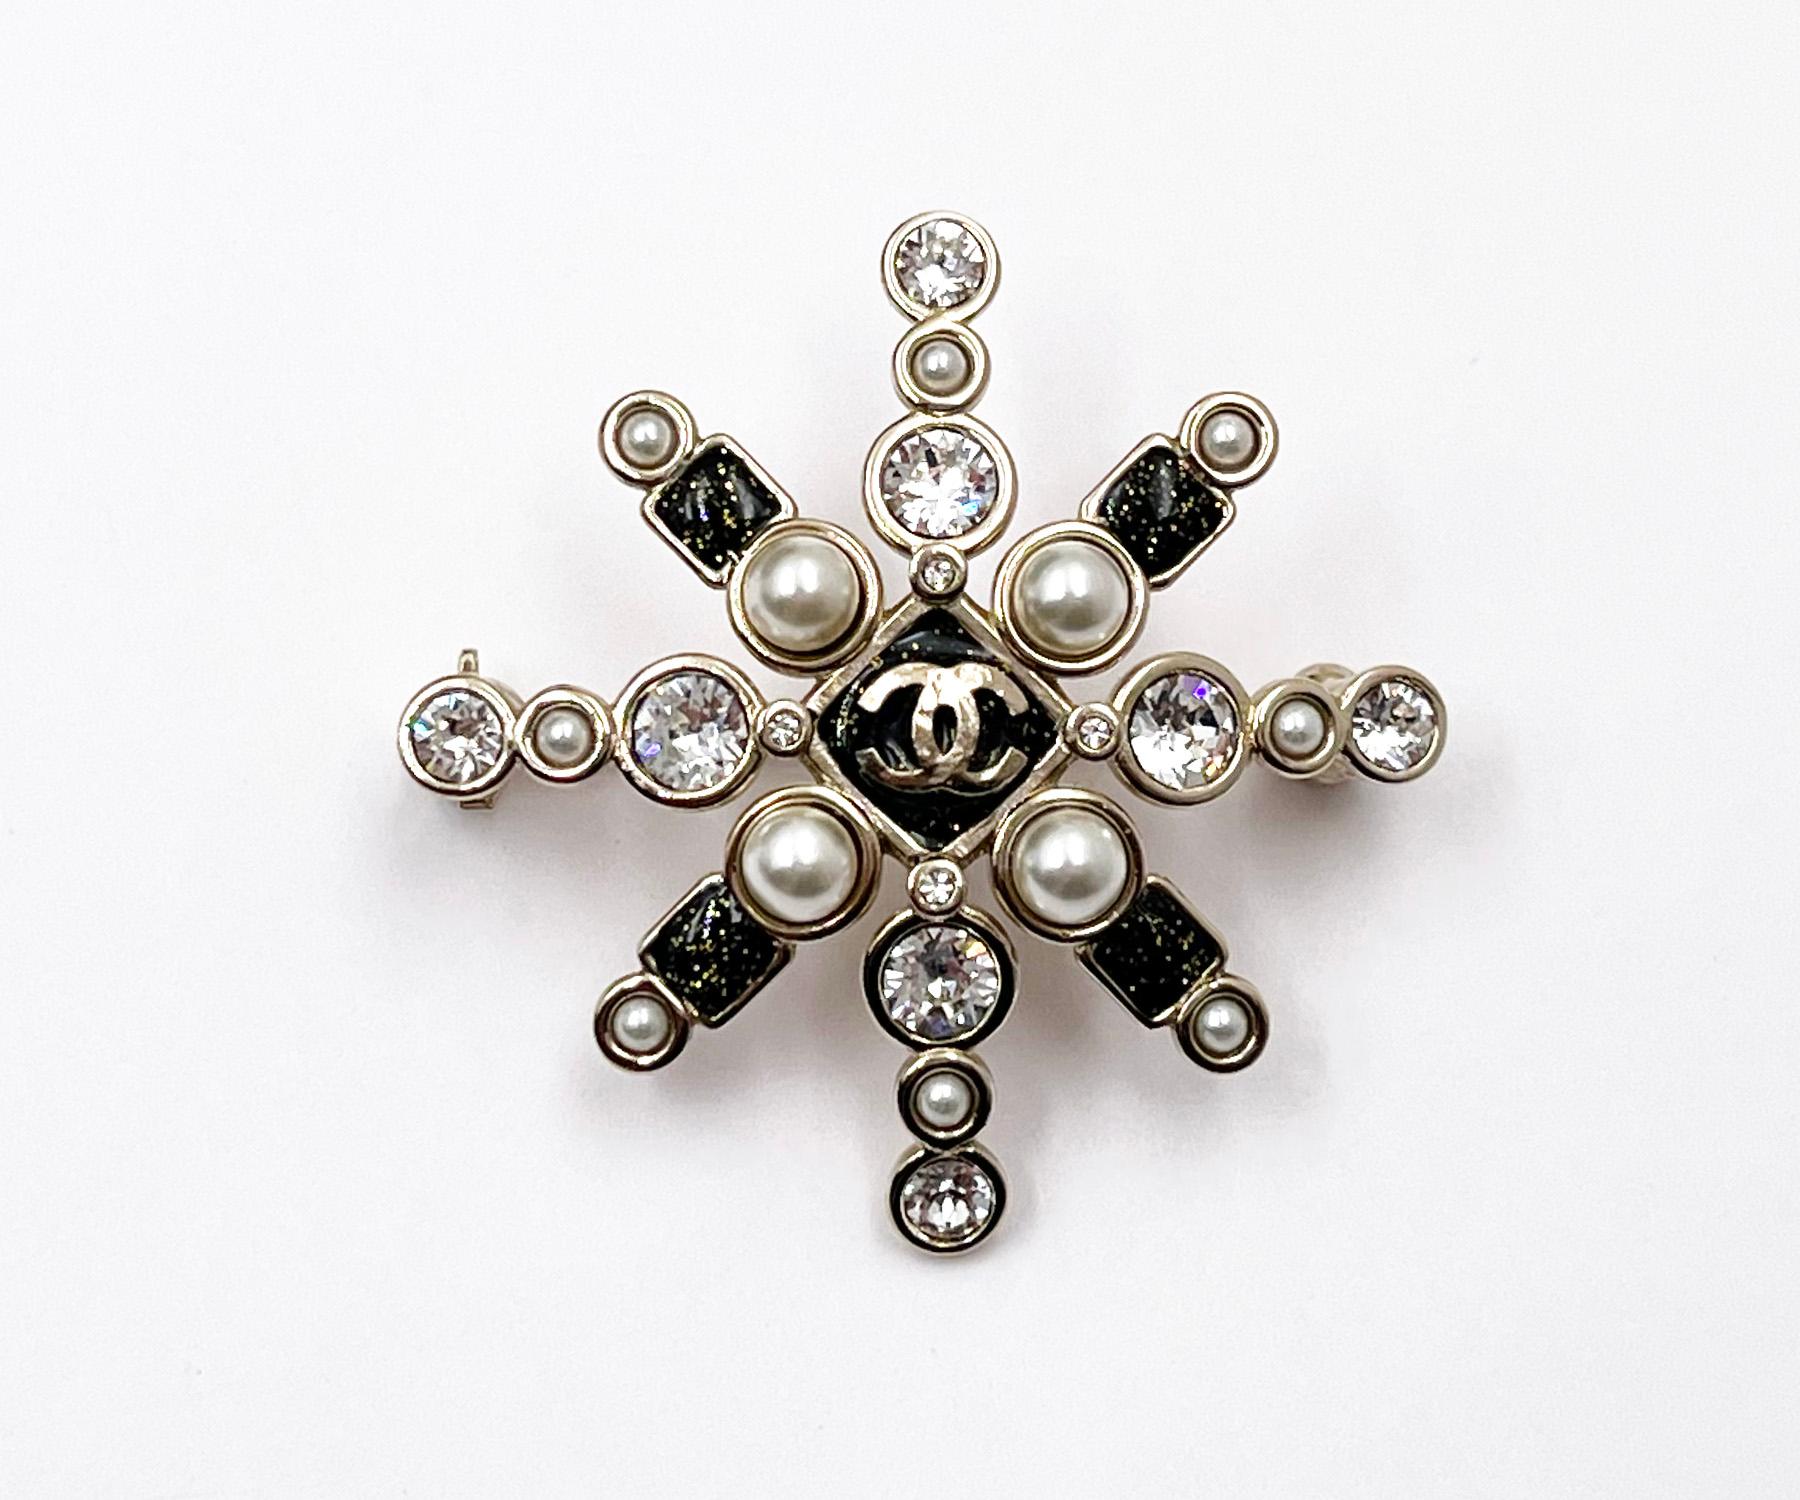 Chanel Cc Brooch 2019 - 5 For Sale on 1stDibs